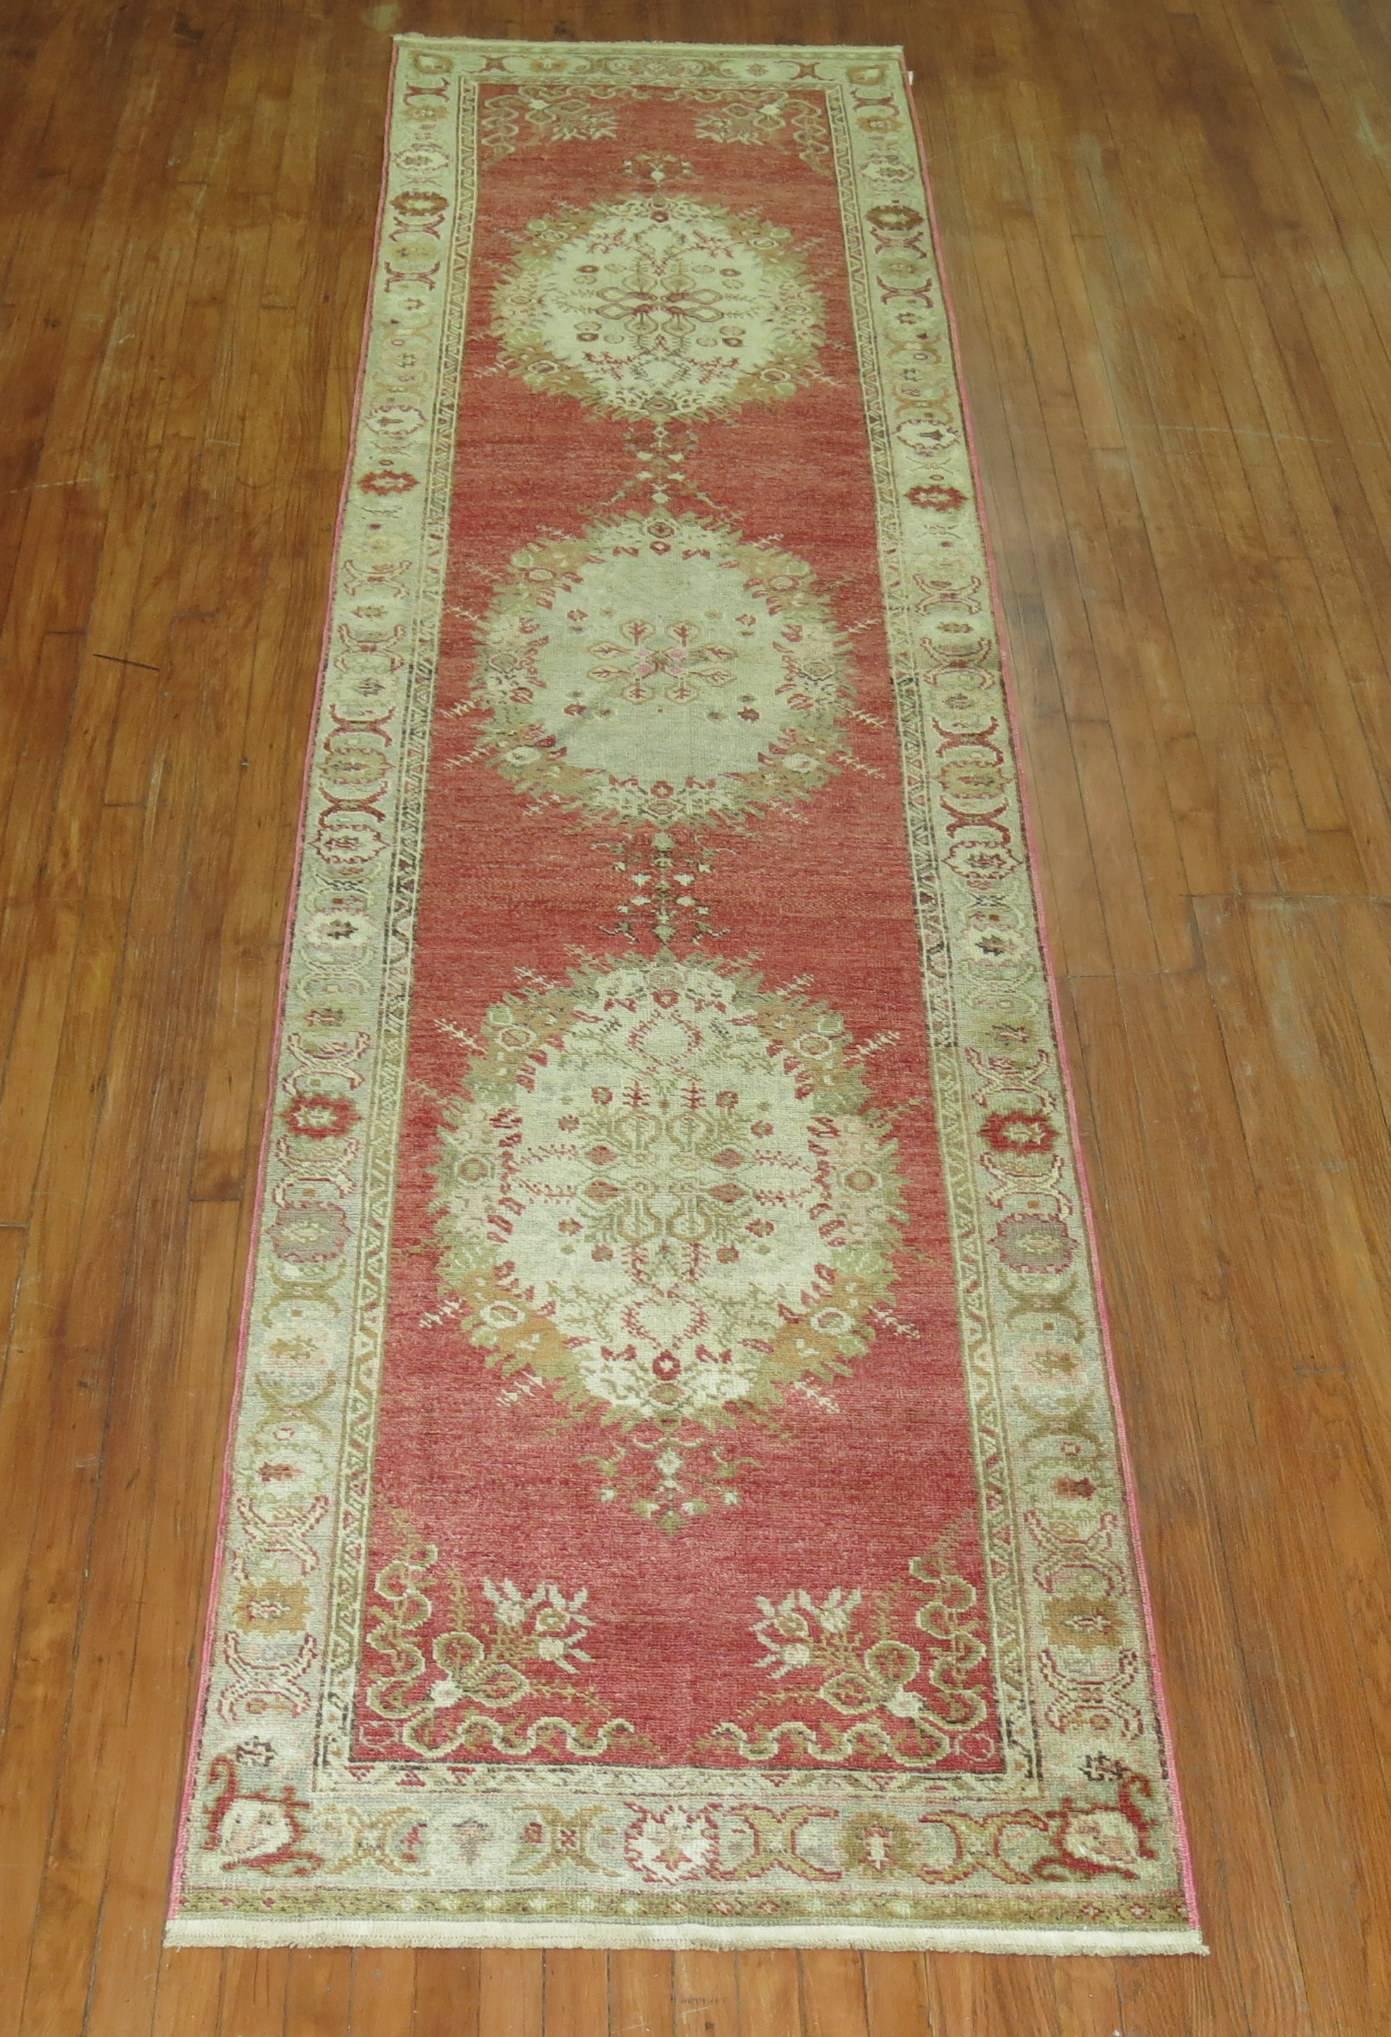 Classic vintage Oushak runner with three medallions occupied by an elaborate border.